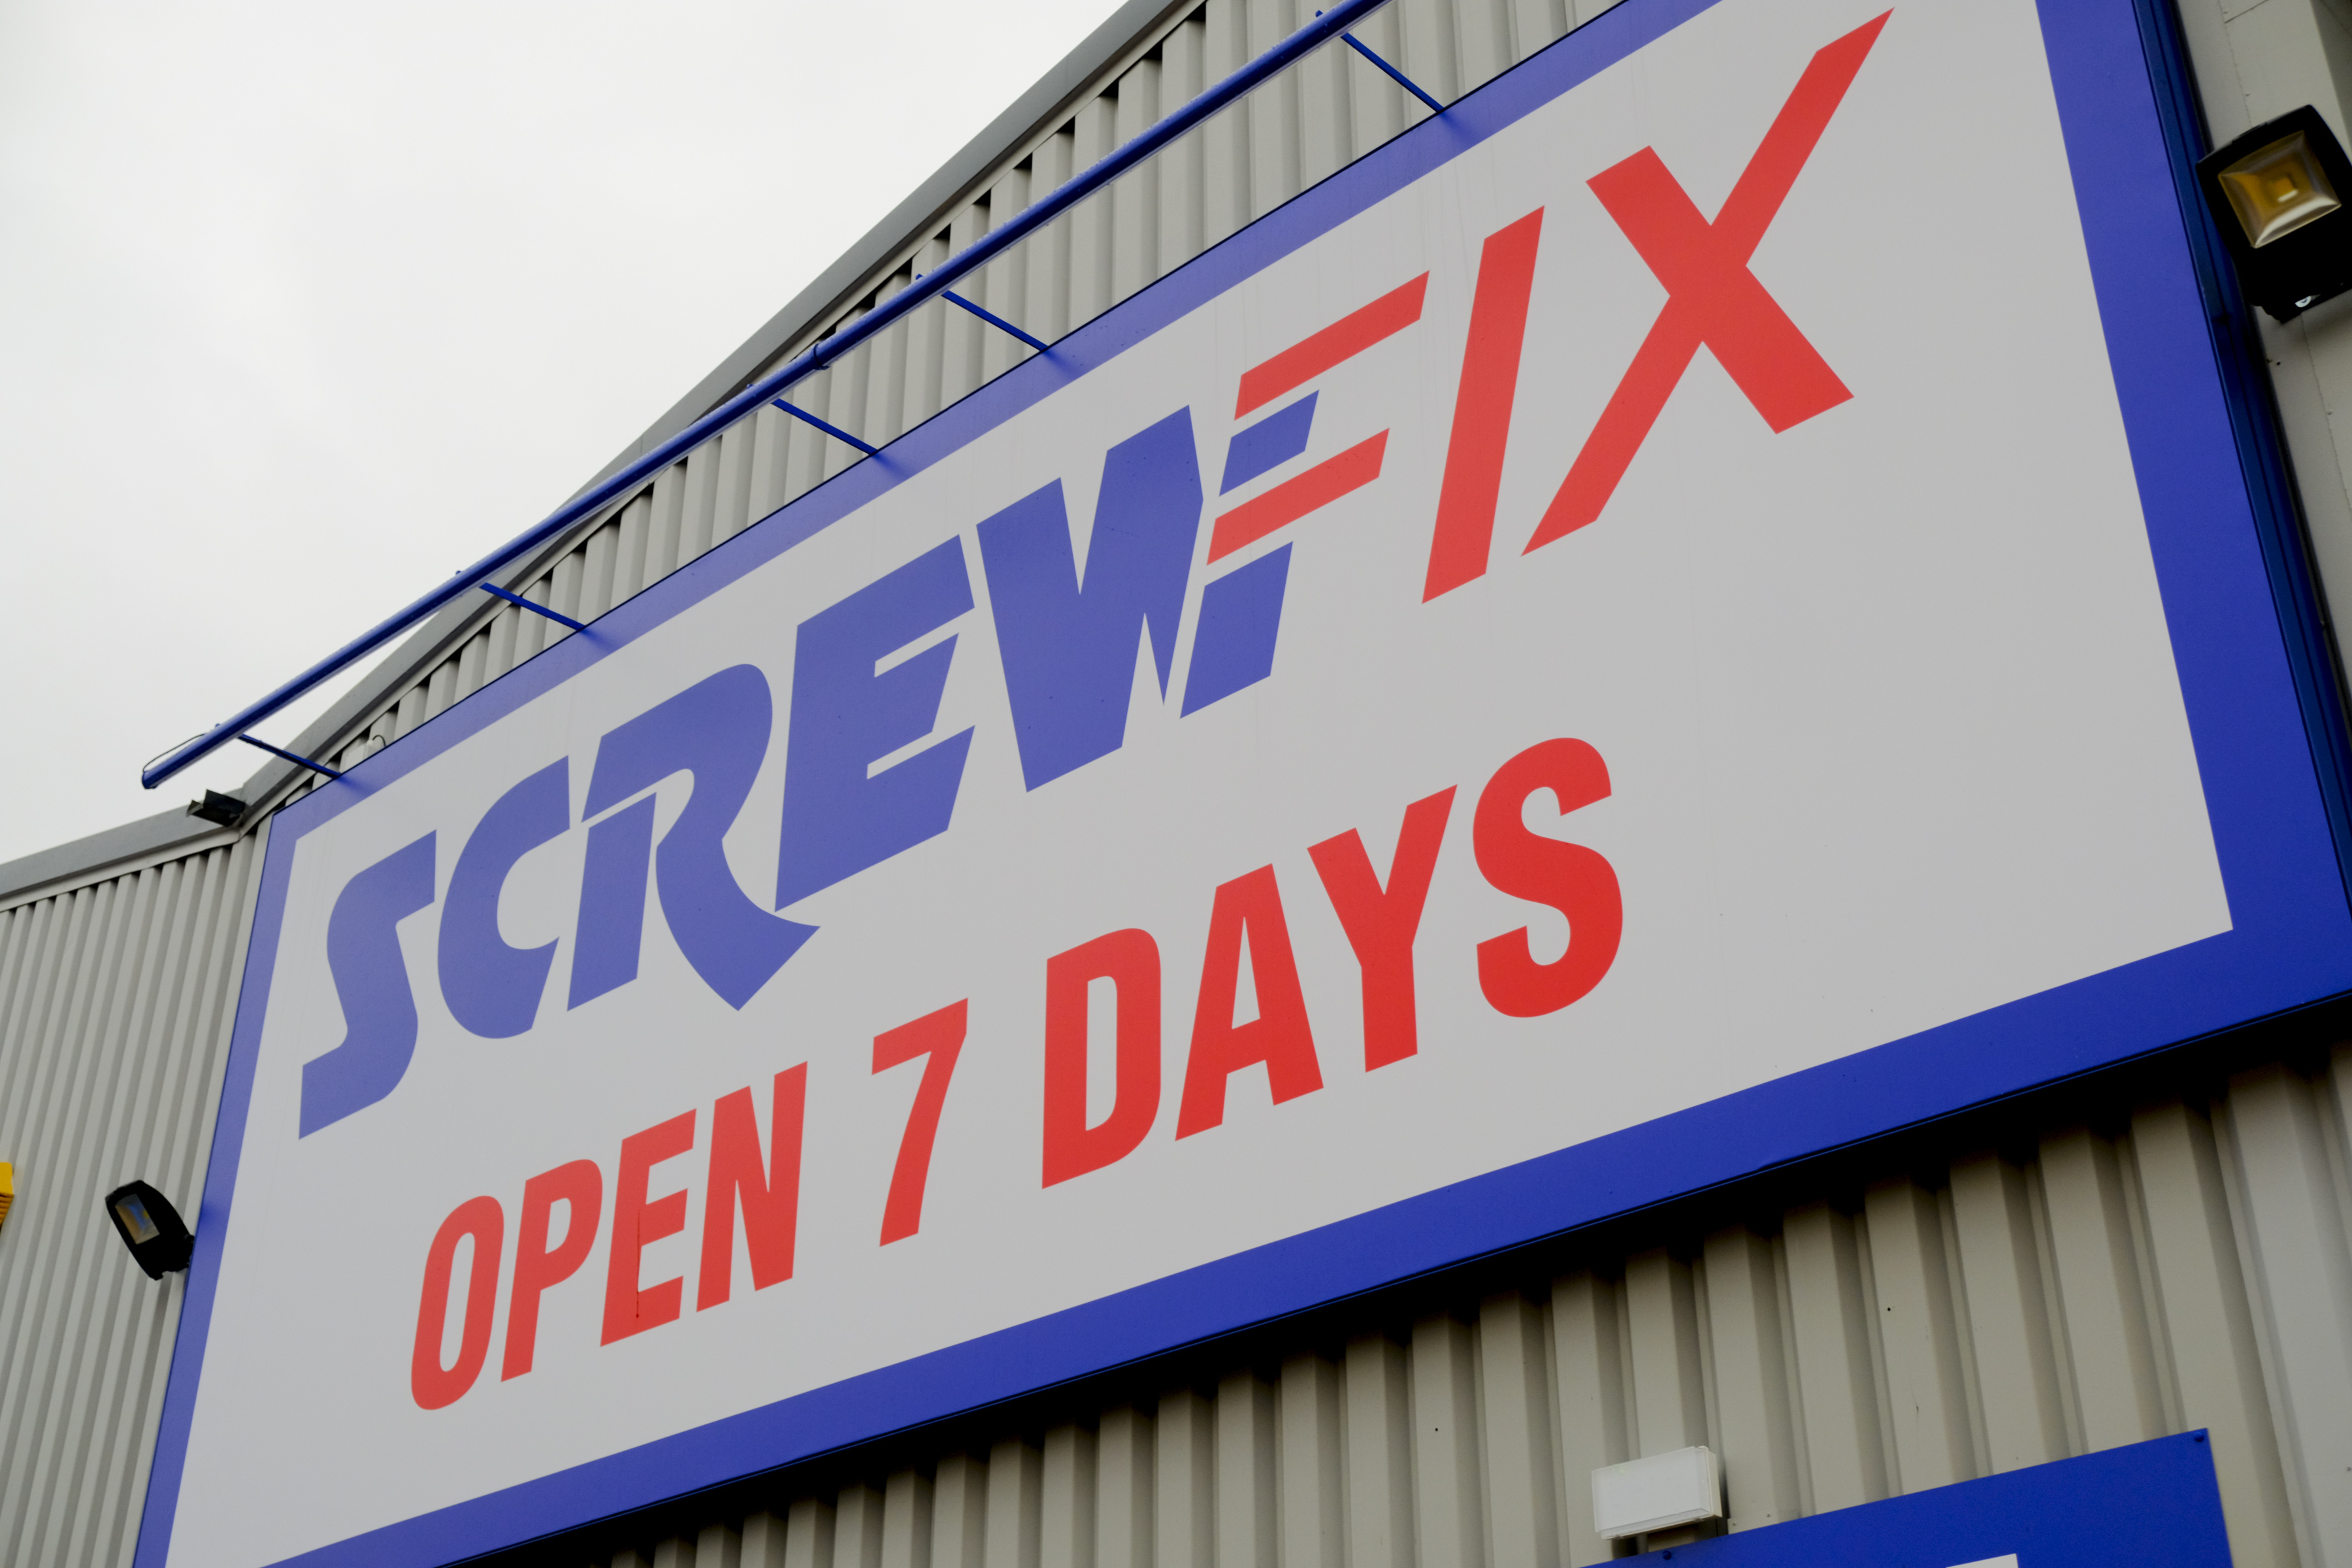 Jobs boost for Leek as new Screwfix store opens